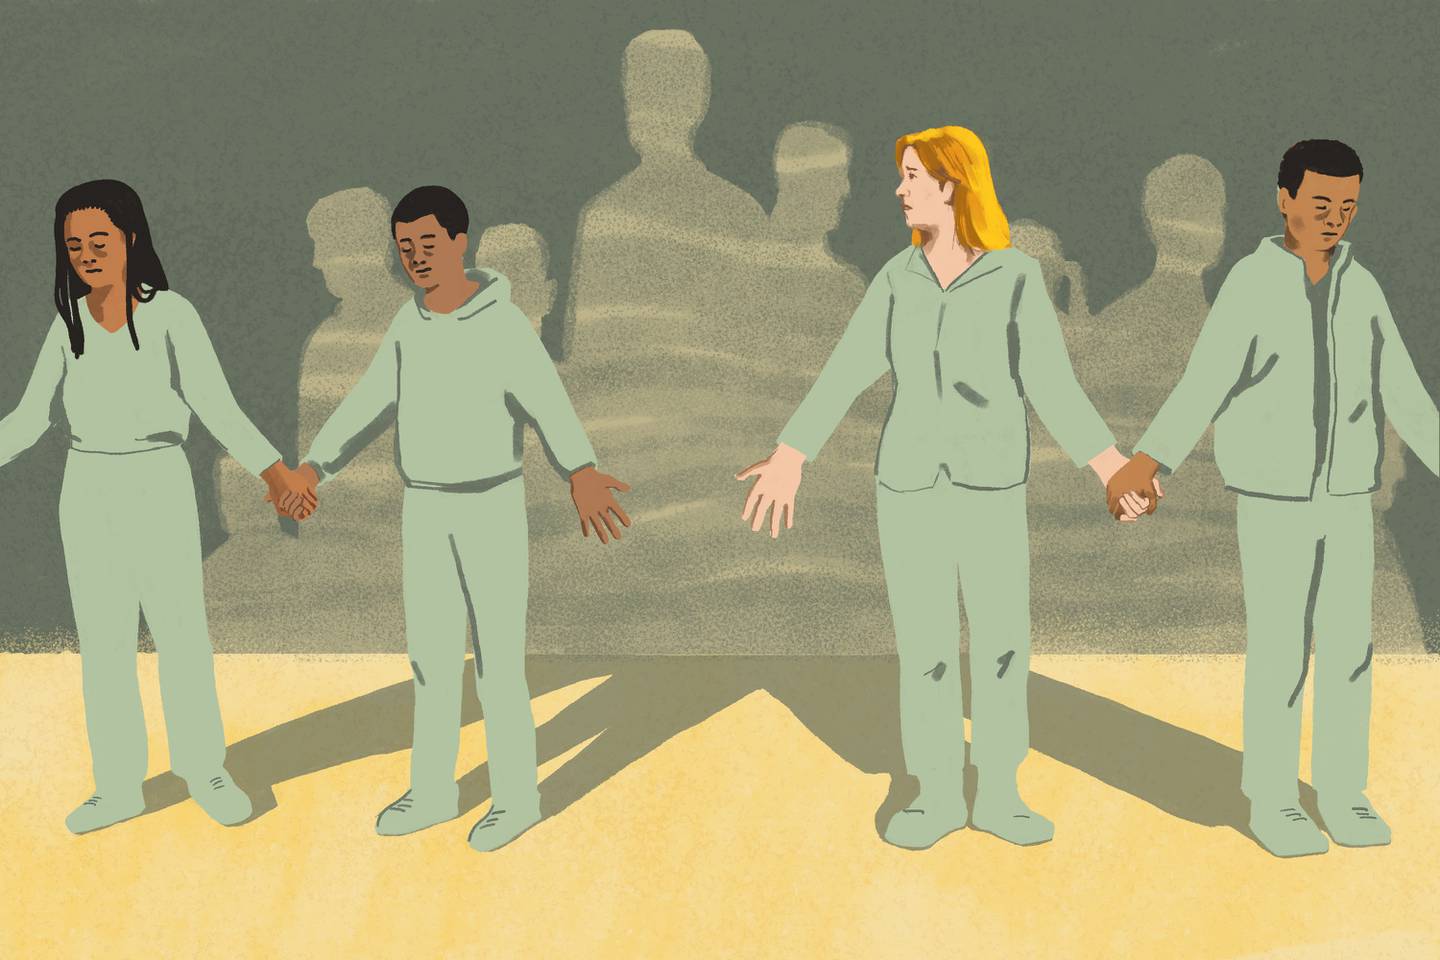 Illustration shows students and female teacher holding hands, with a gap in the middle of the image. They casts shadows which become the silhouettes of other people barely visible against the wall behind them.